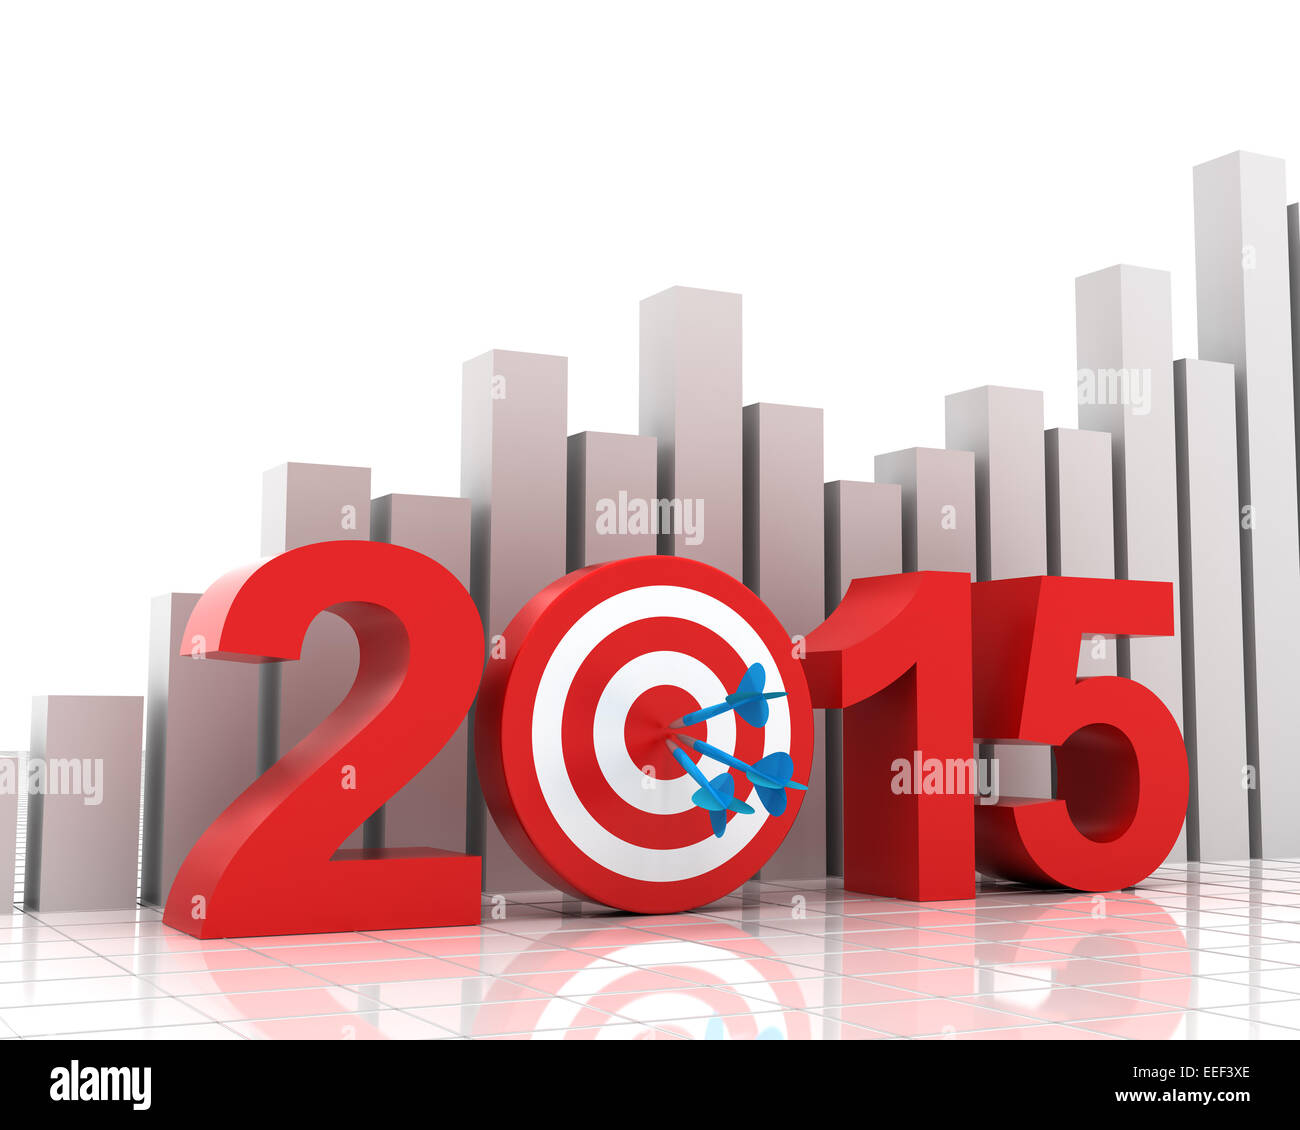 2015 target with bar chart background Stock Photo